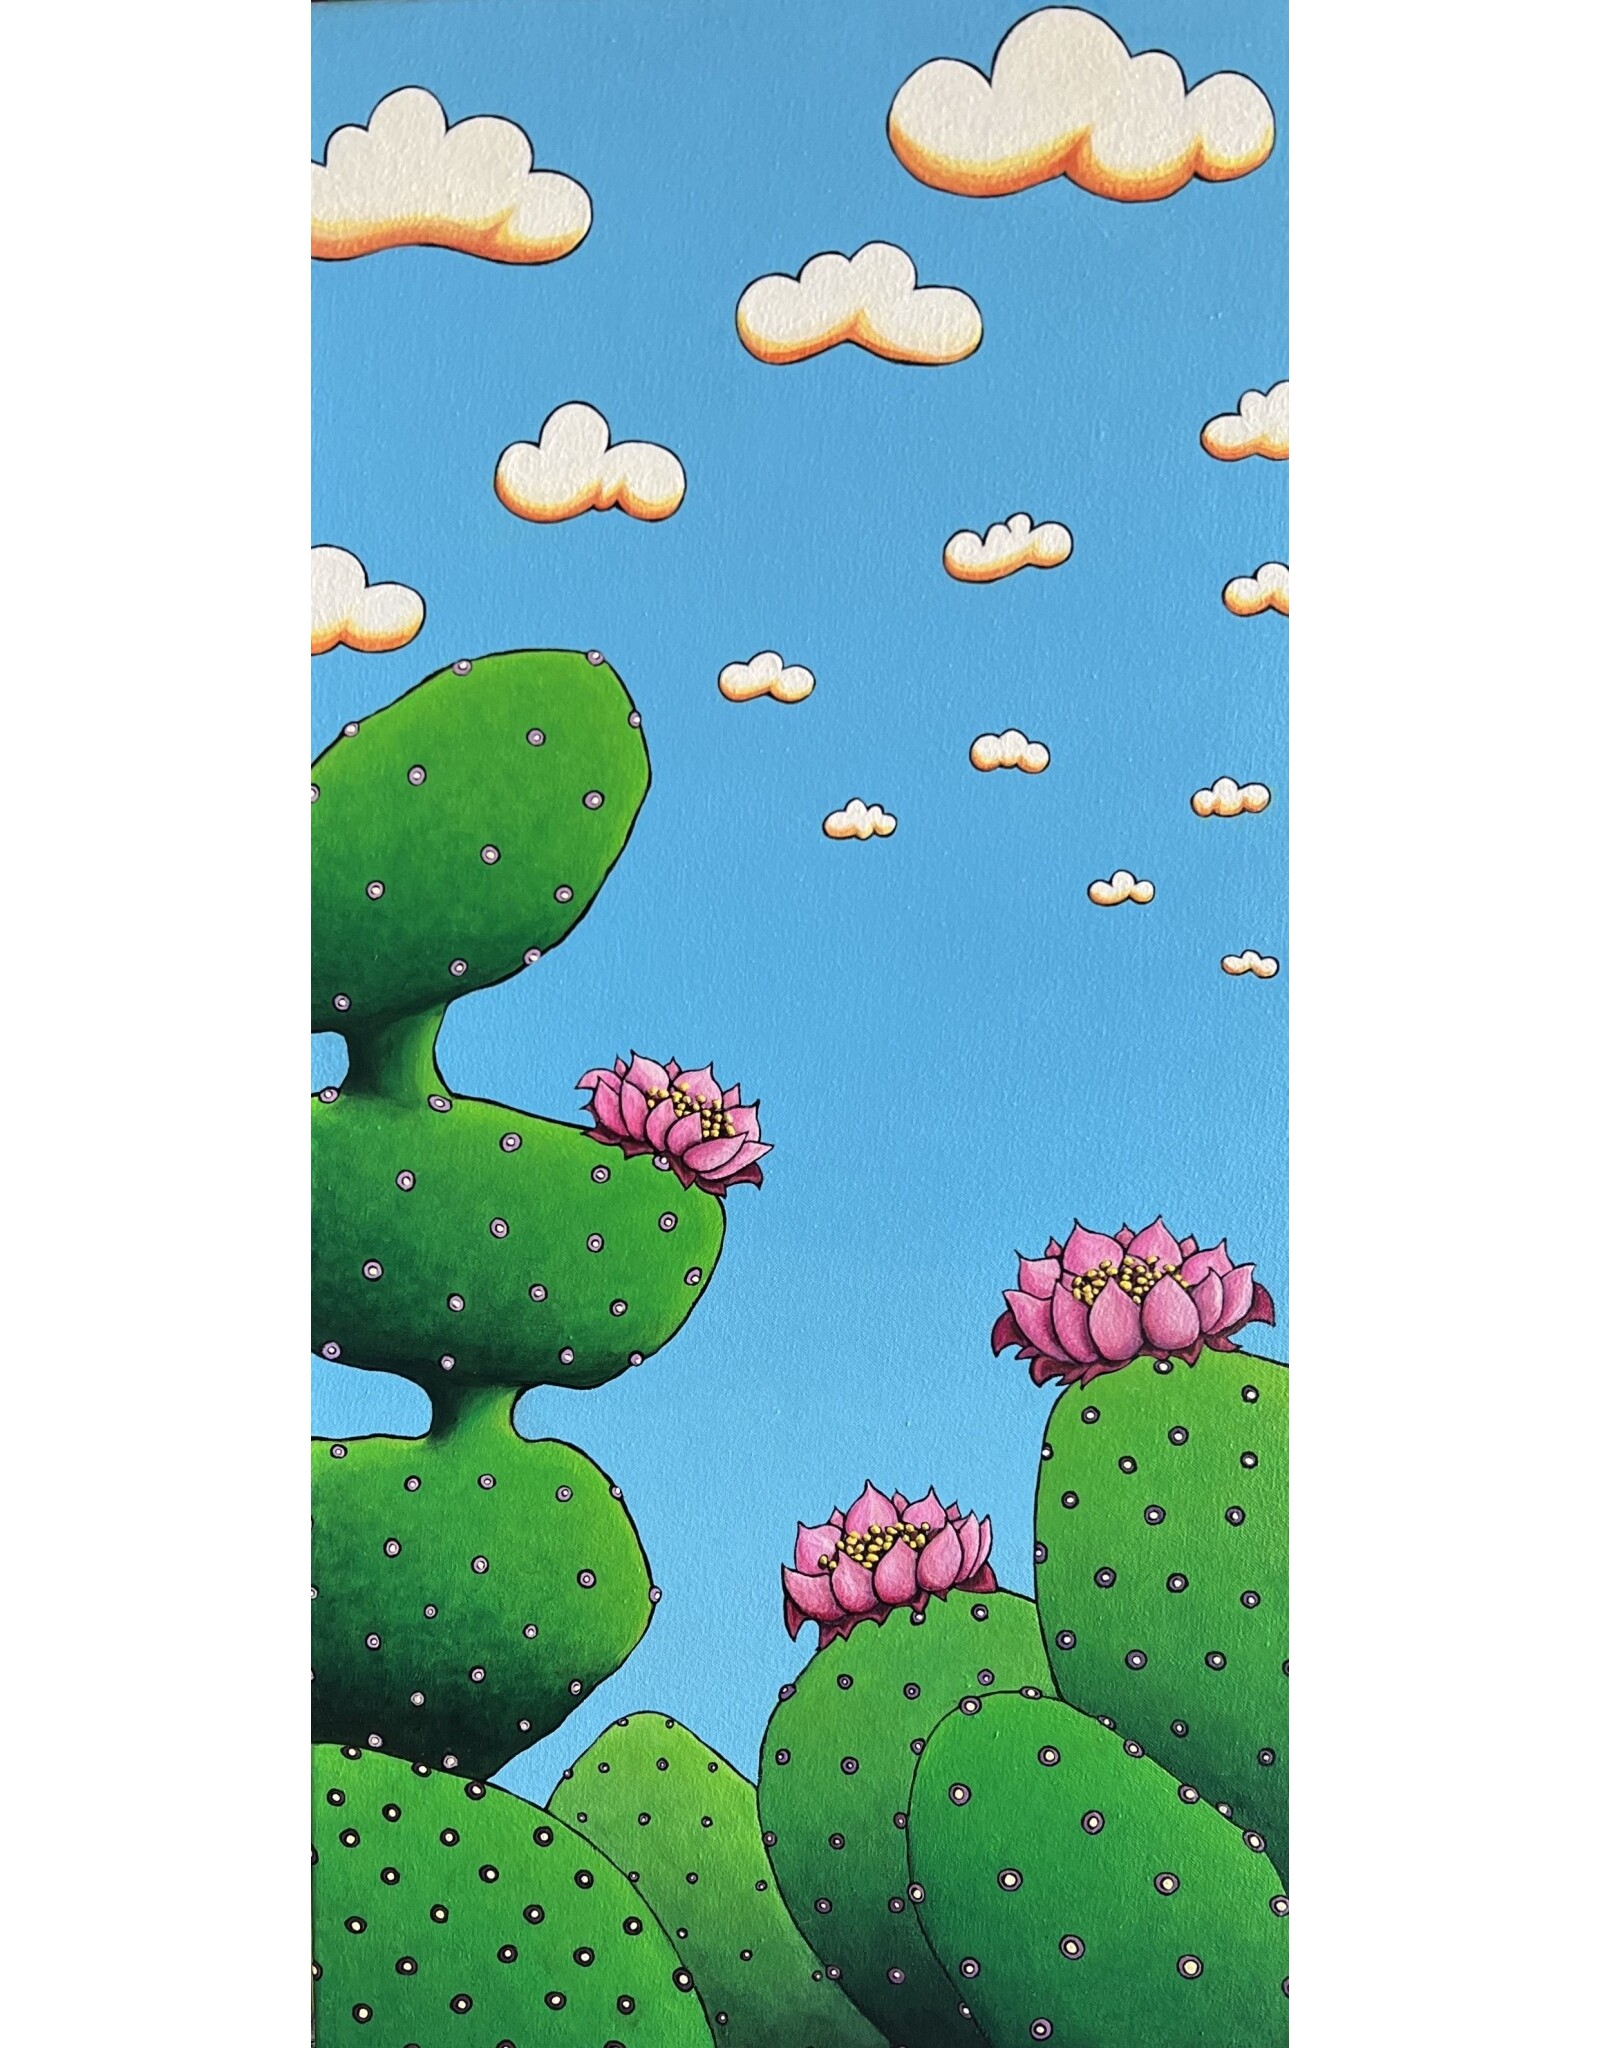 Lars Andrews "Untitled Cacti",  30 x 15 inches,  acrylic on canvas, unframed.  -LA